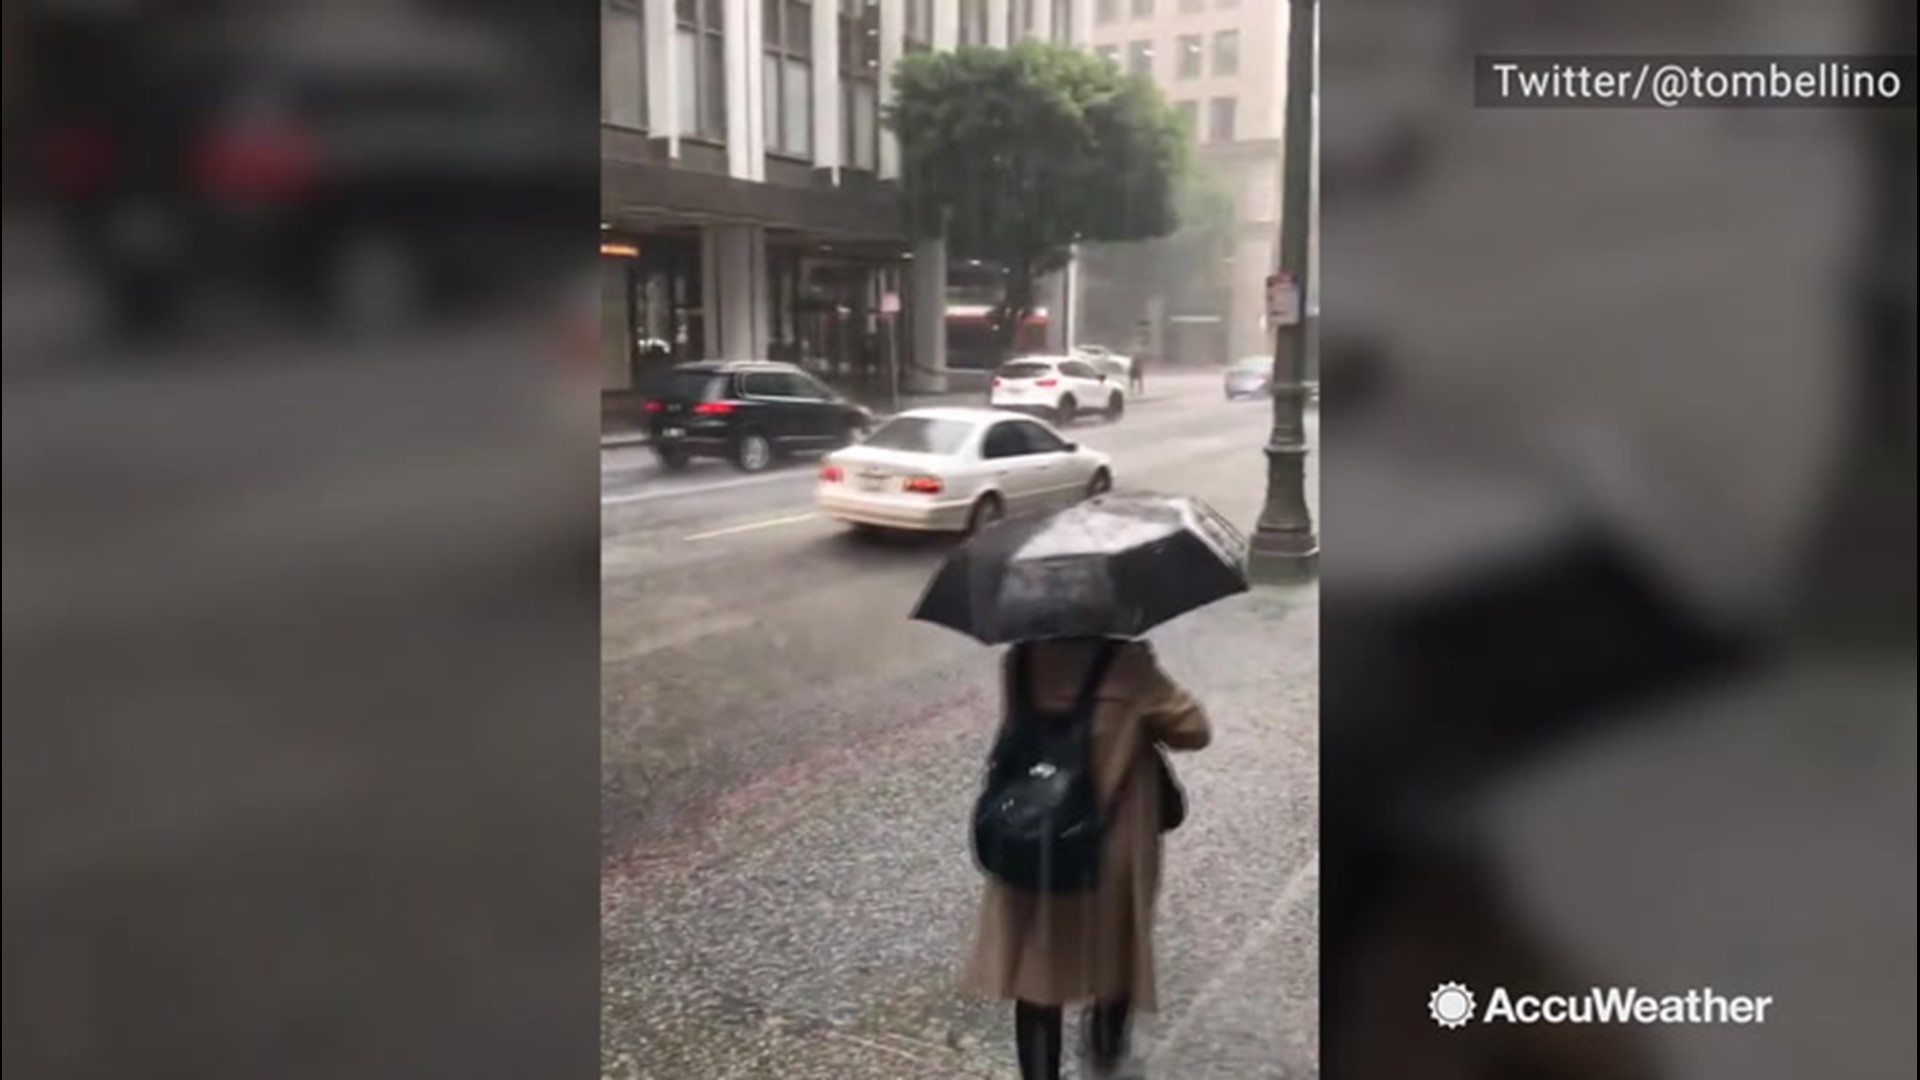 A downpour of hail was let loose on Los Angeles, California, on Nov. 20, that had everyone ducking for cover. Umbrellas were a must when going outside.